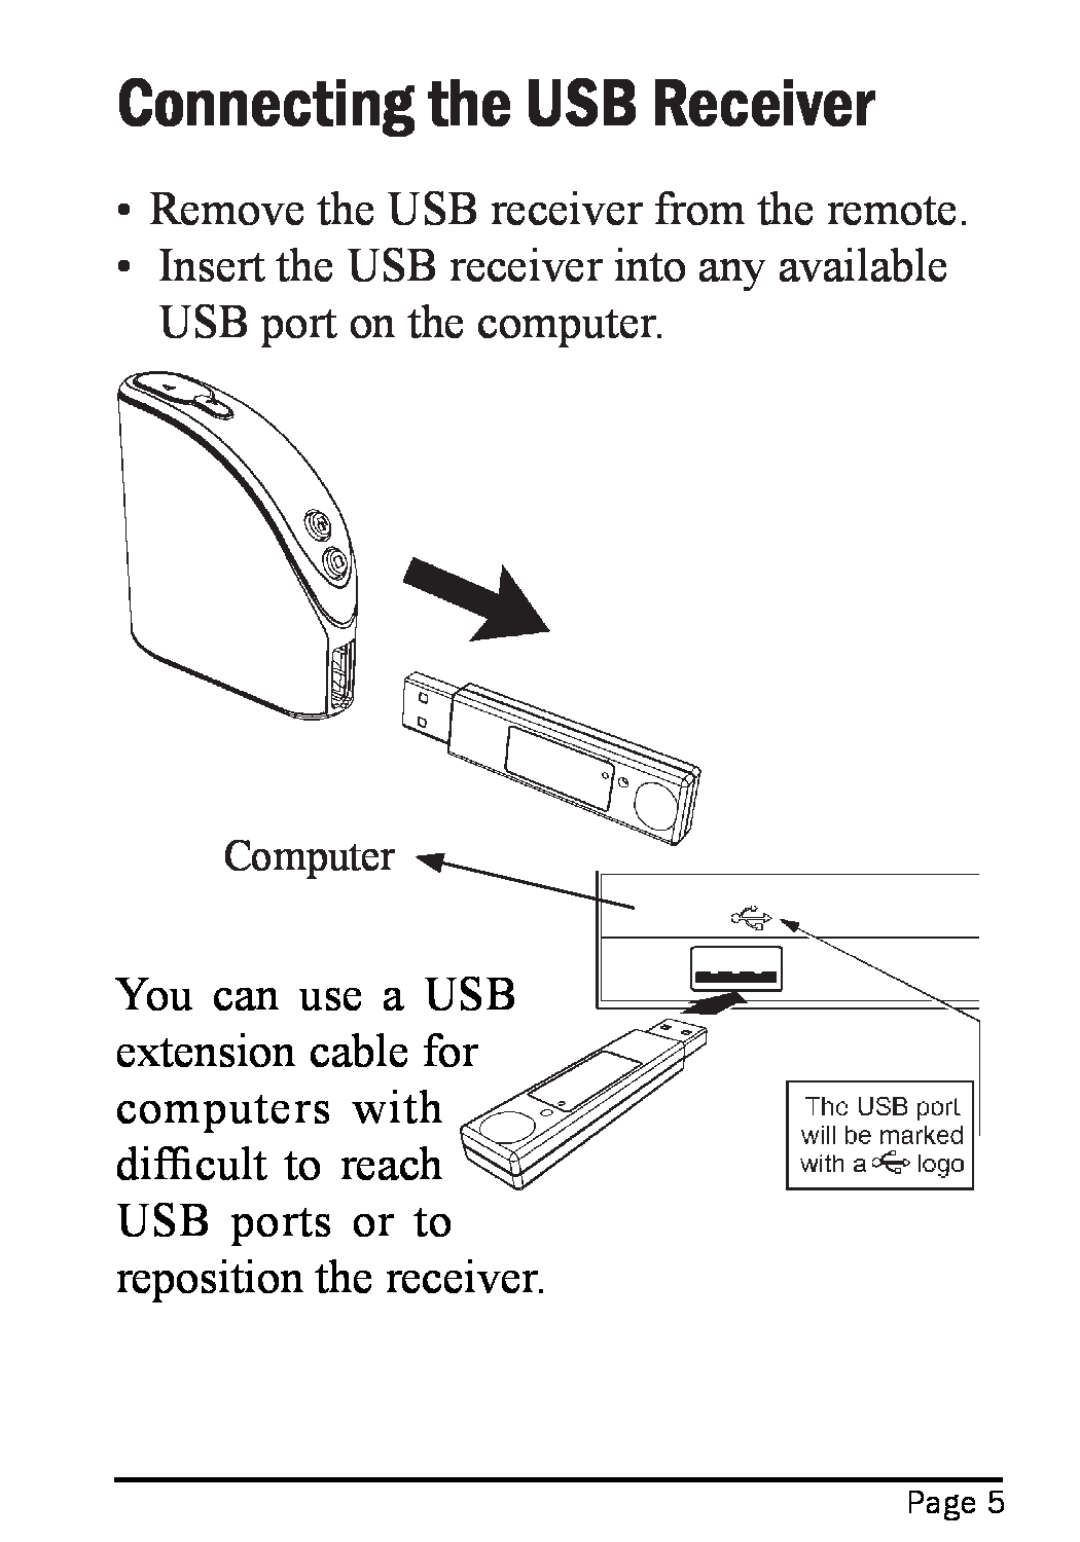 Interlink electronic RemotePoint Onyx Connecting the USB Receiver, Remove the USB receiver from the remote, Computer, Page 